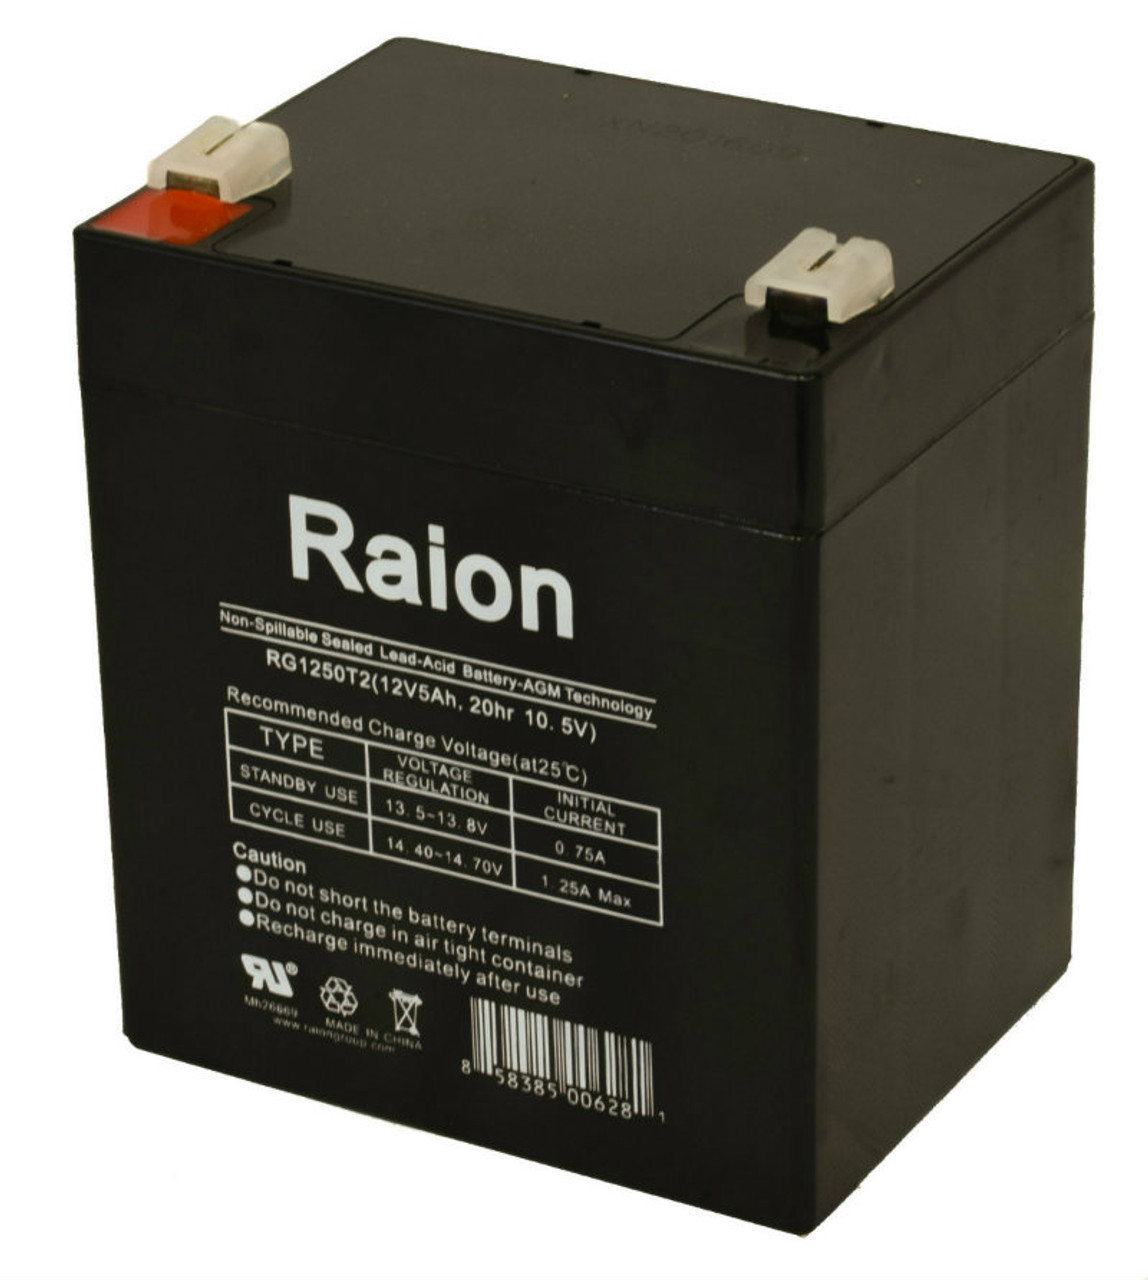 Raion Power RG1250T1 Replacement Battery for VCELL 12VC4.5